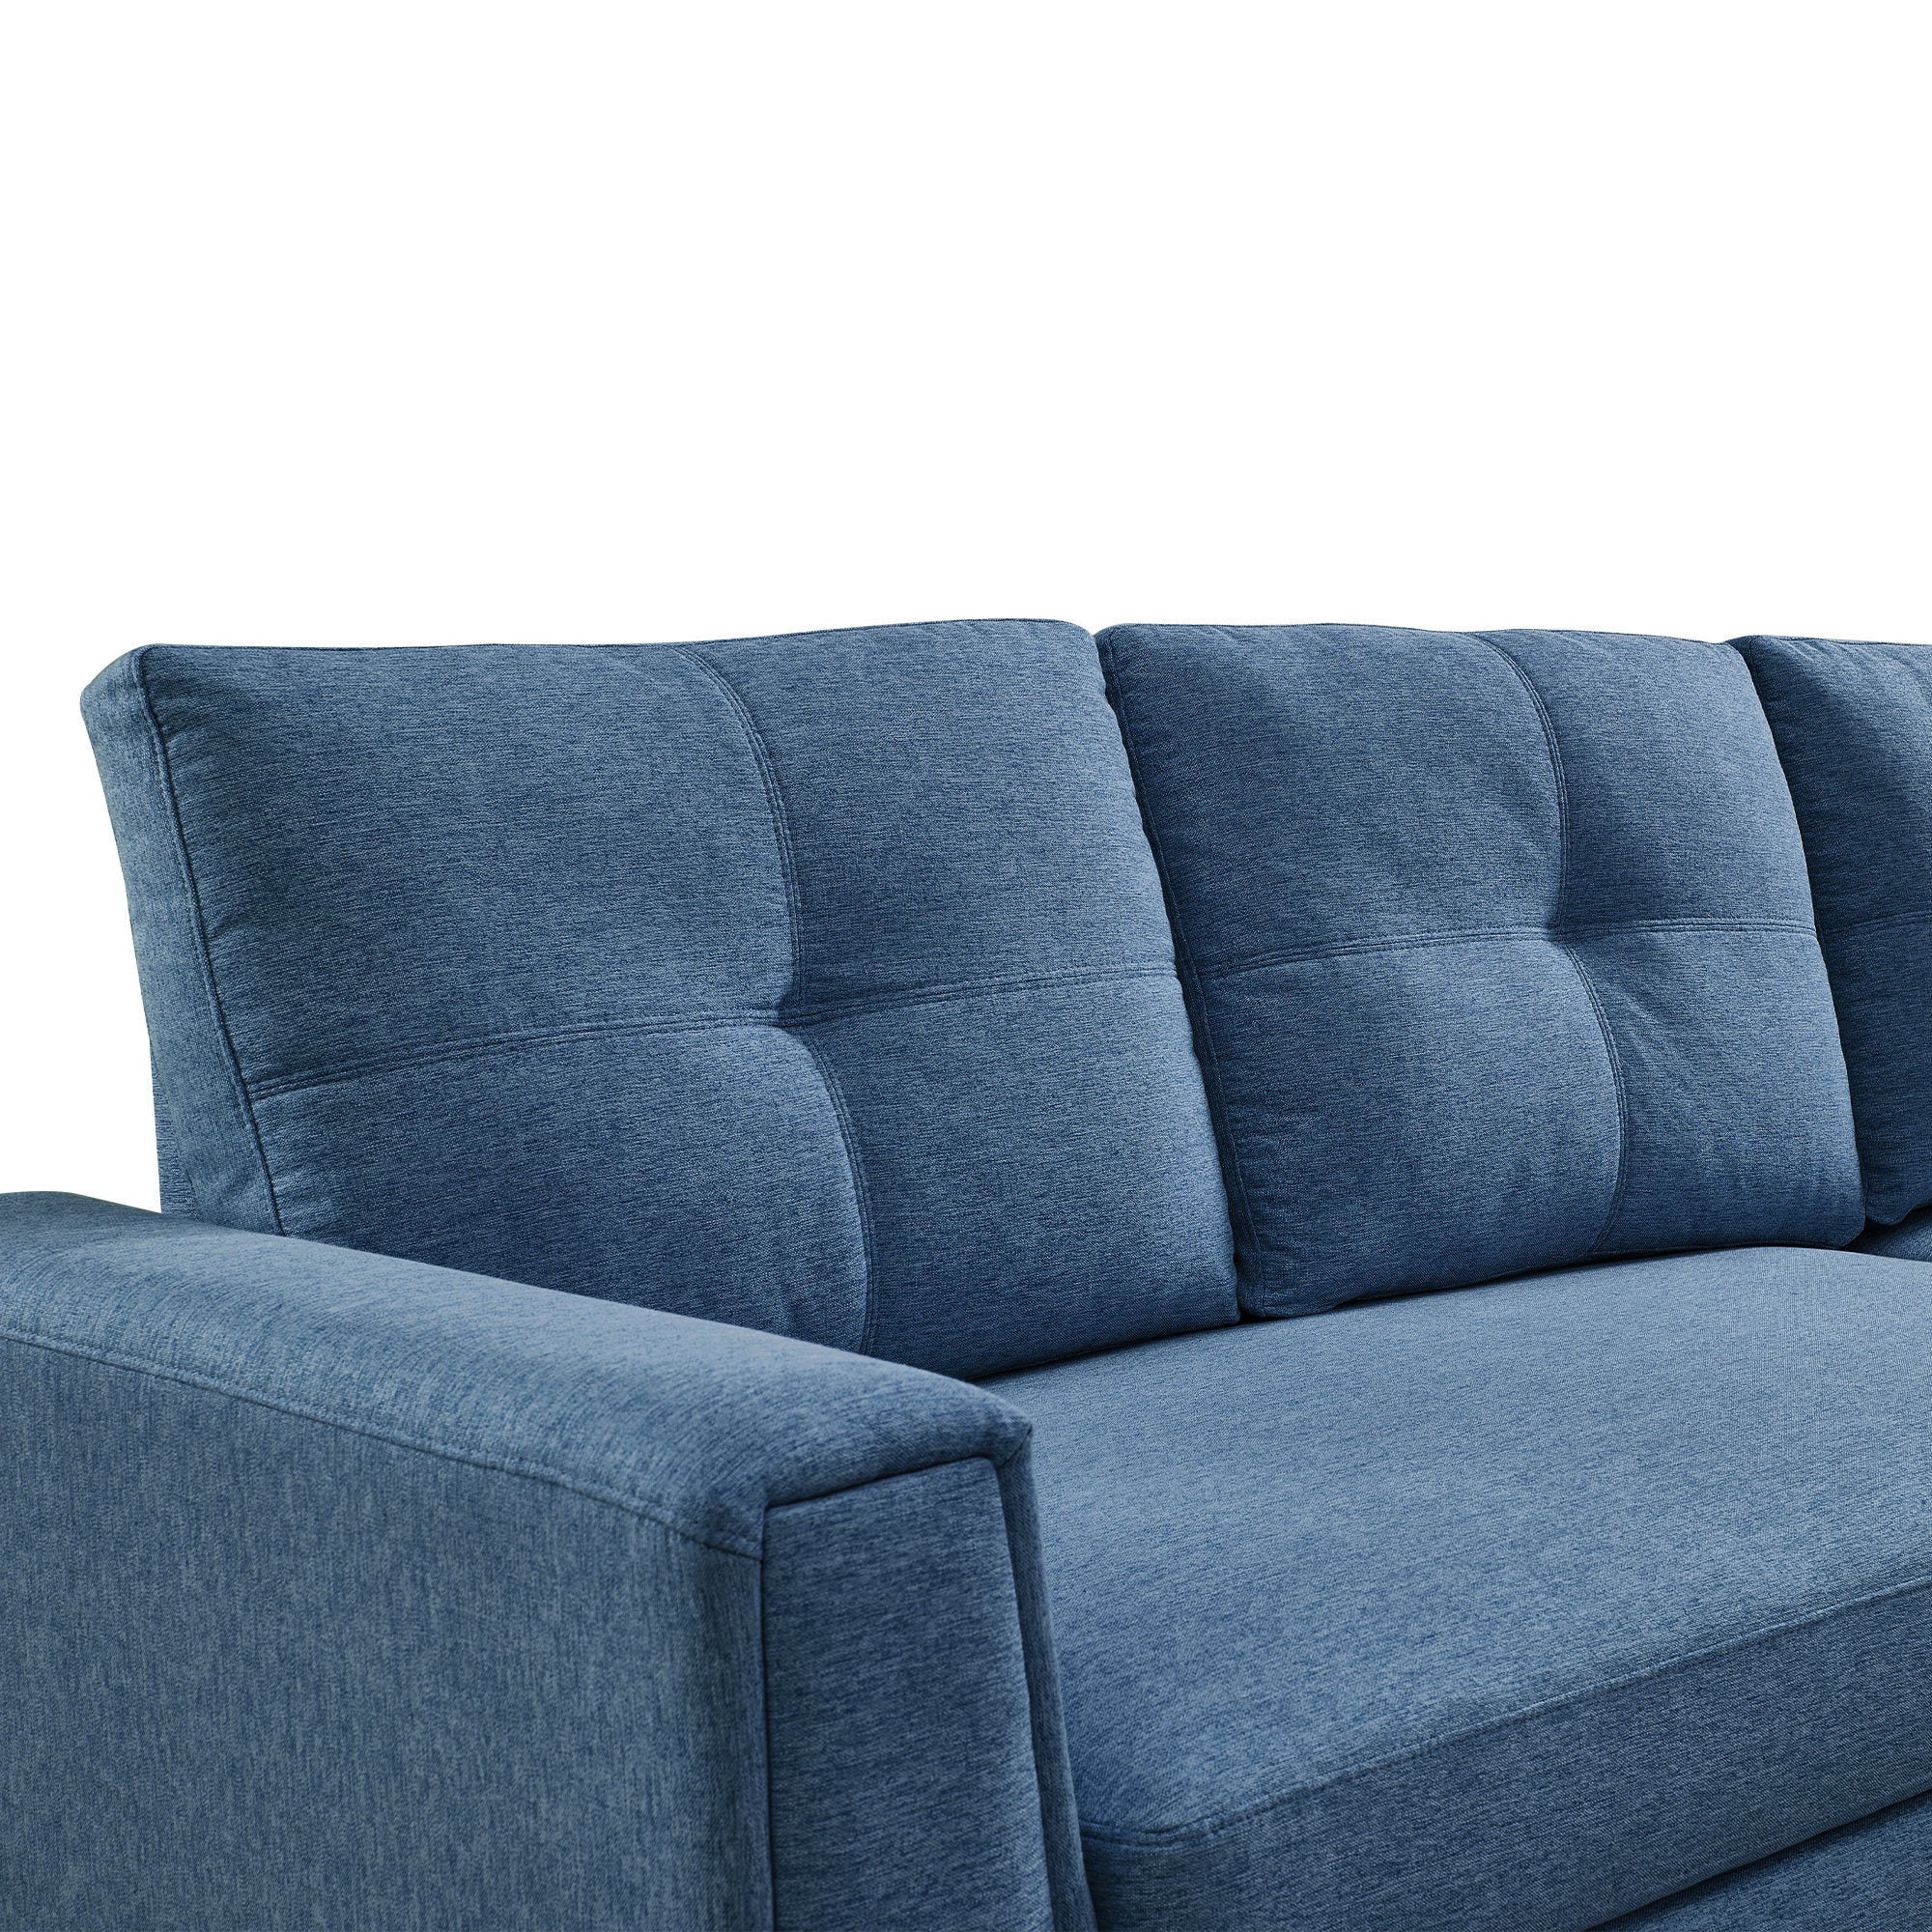 91.7" L-Shape Sleeper Sectional Sofa w/Storage Chaise - Blue Fabric-Sleeper Sectionals-American Furniture Outlet